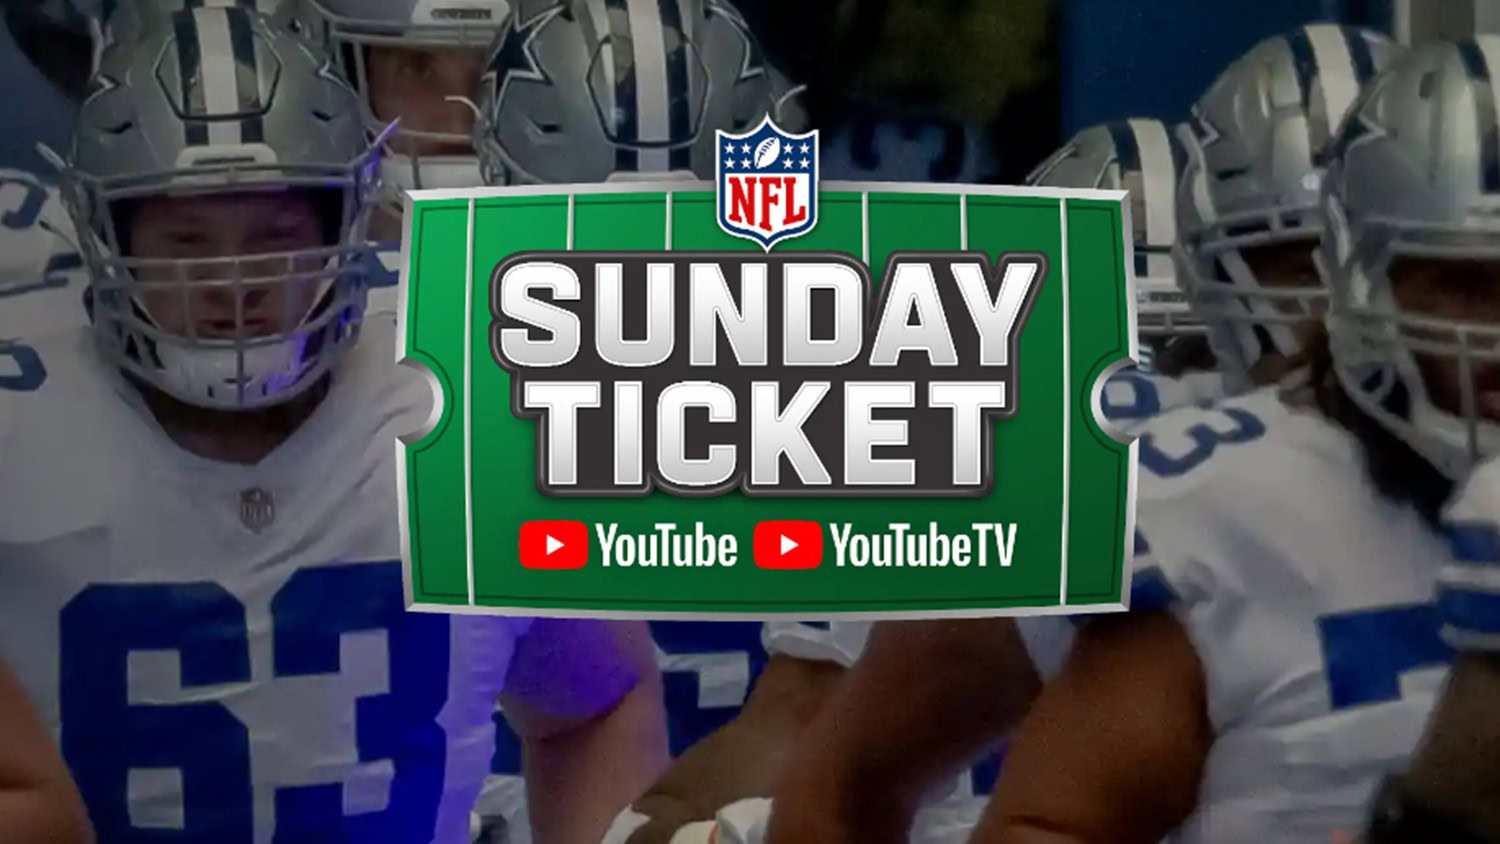 NFL Sunday Ticket Deals, plans, and more